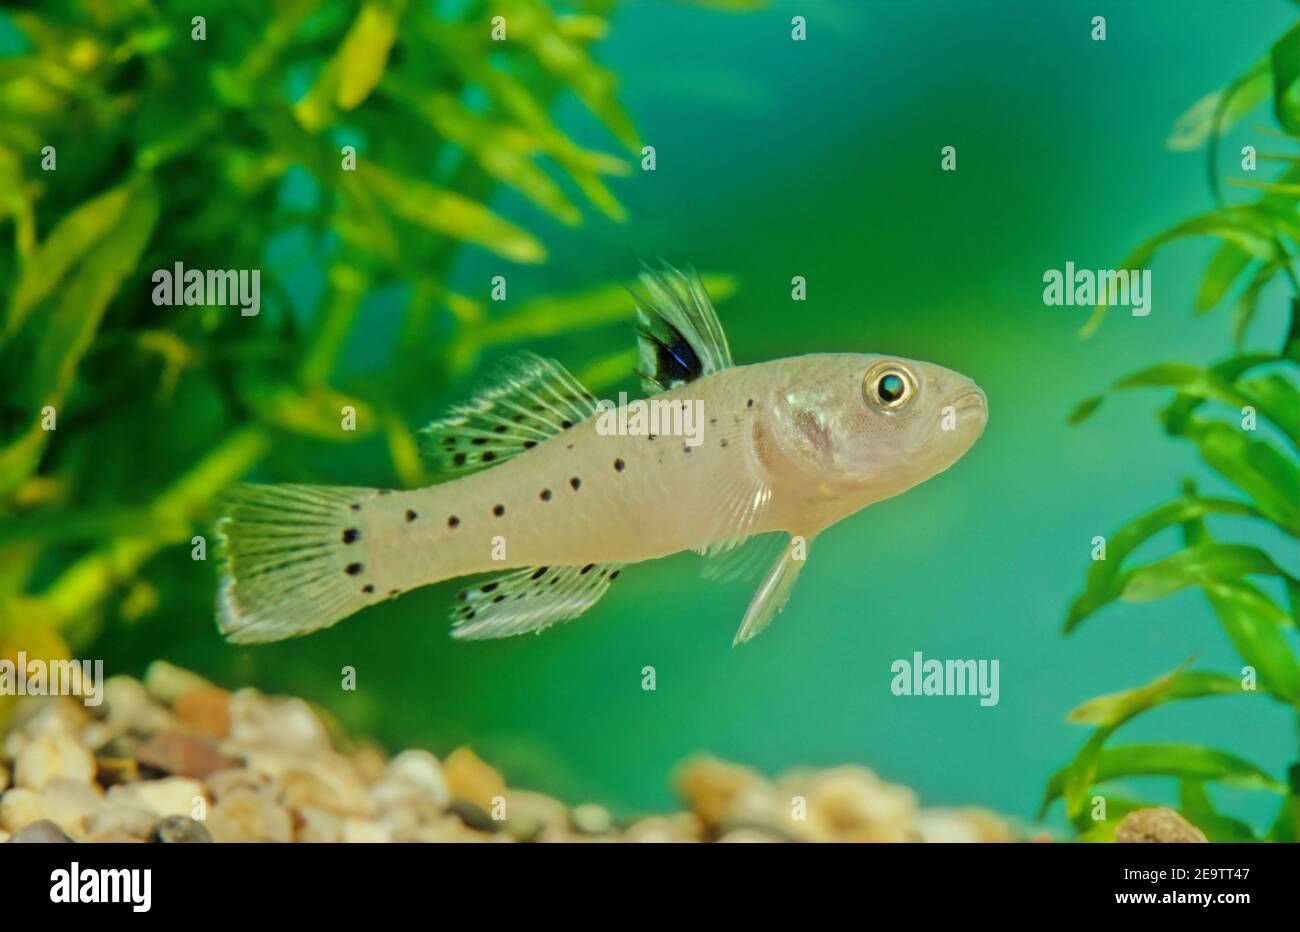 Stigmatogobius sadanundio is a species of goby native to south Asia from India to Indonesia including Sri Lanka and the Andaman Islands. Stock Photo